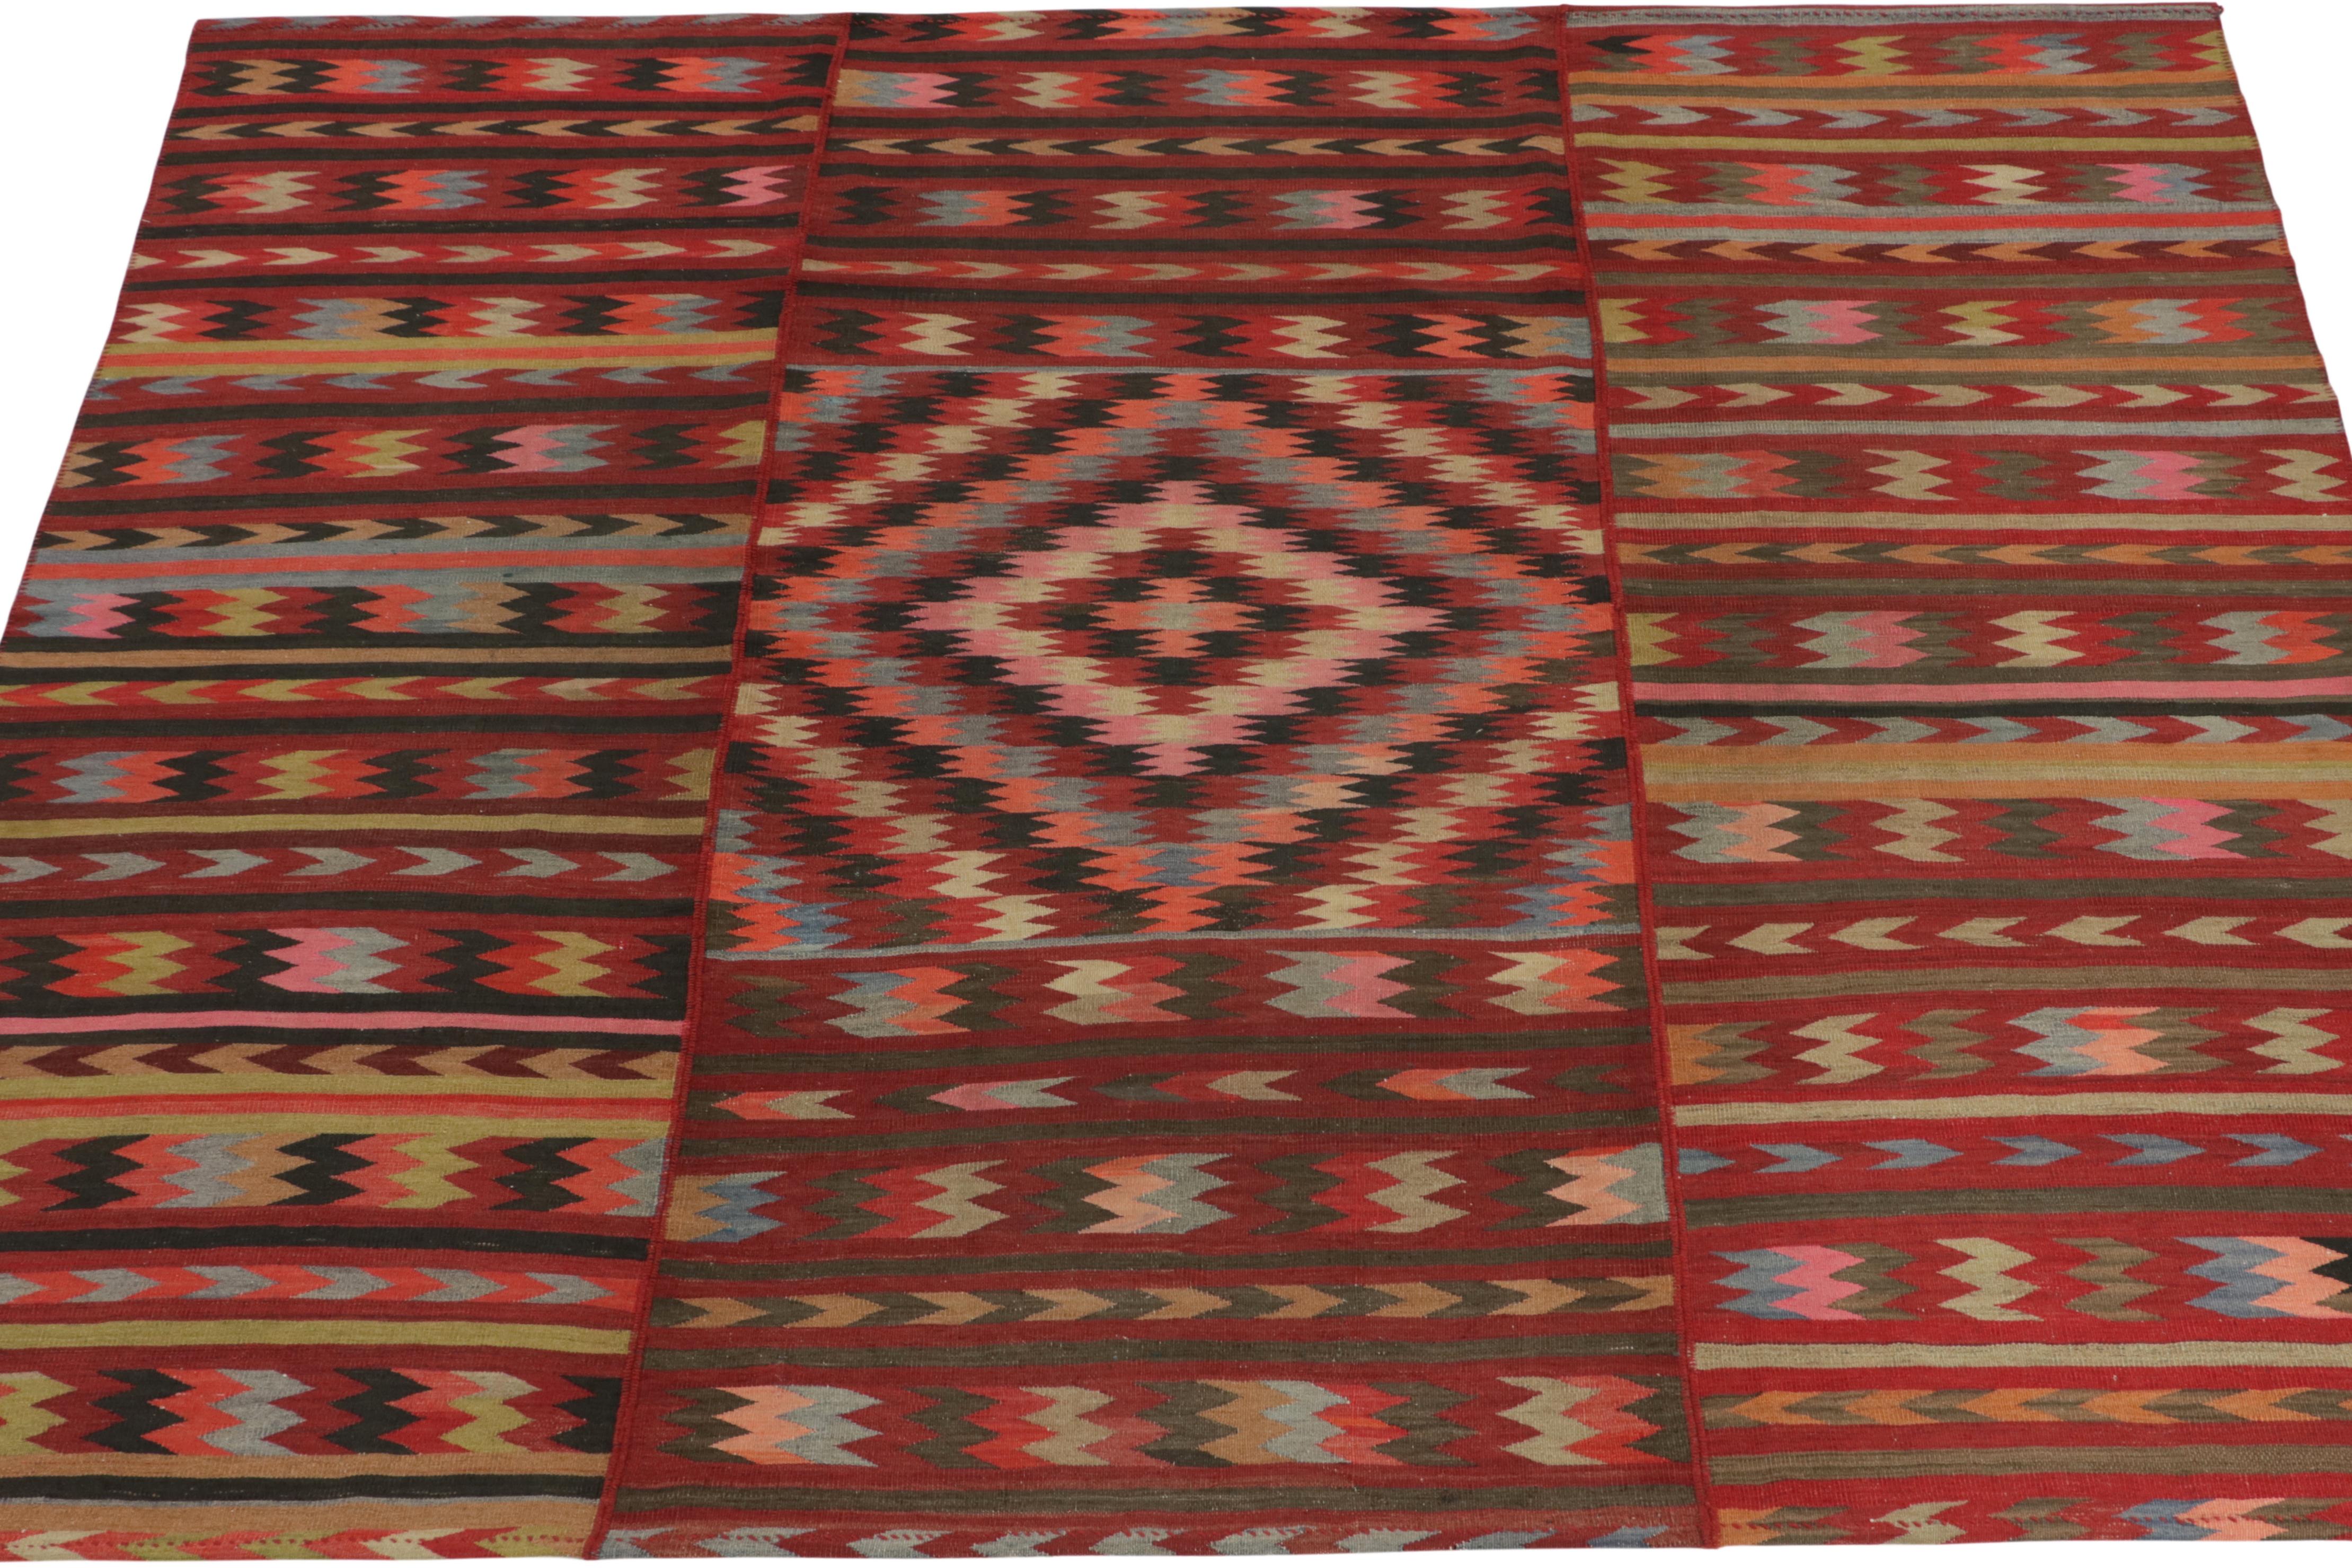 Hand-Knotted Vintage Persian Bidjar Tribal Kilim in Polychromatic Patterns by Rug & Kilim For Sale